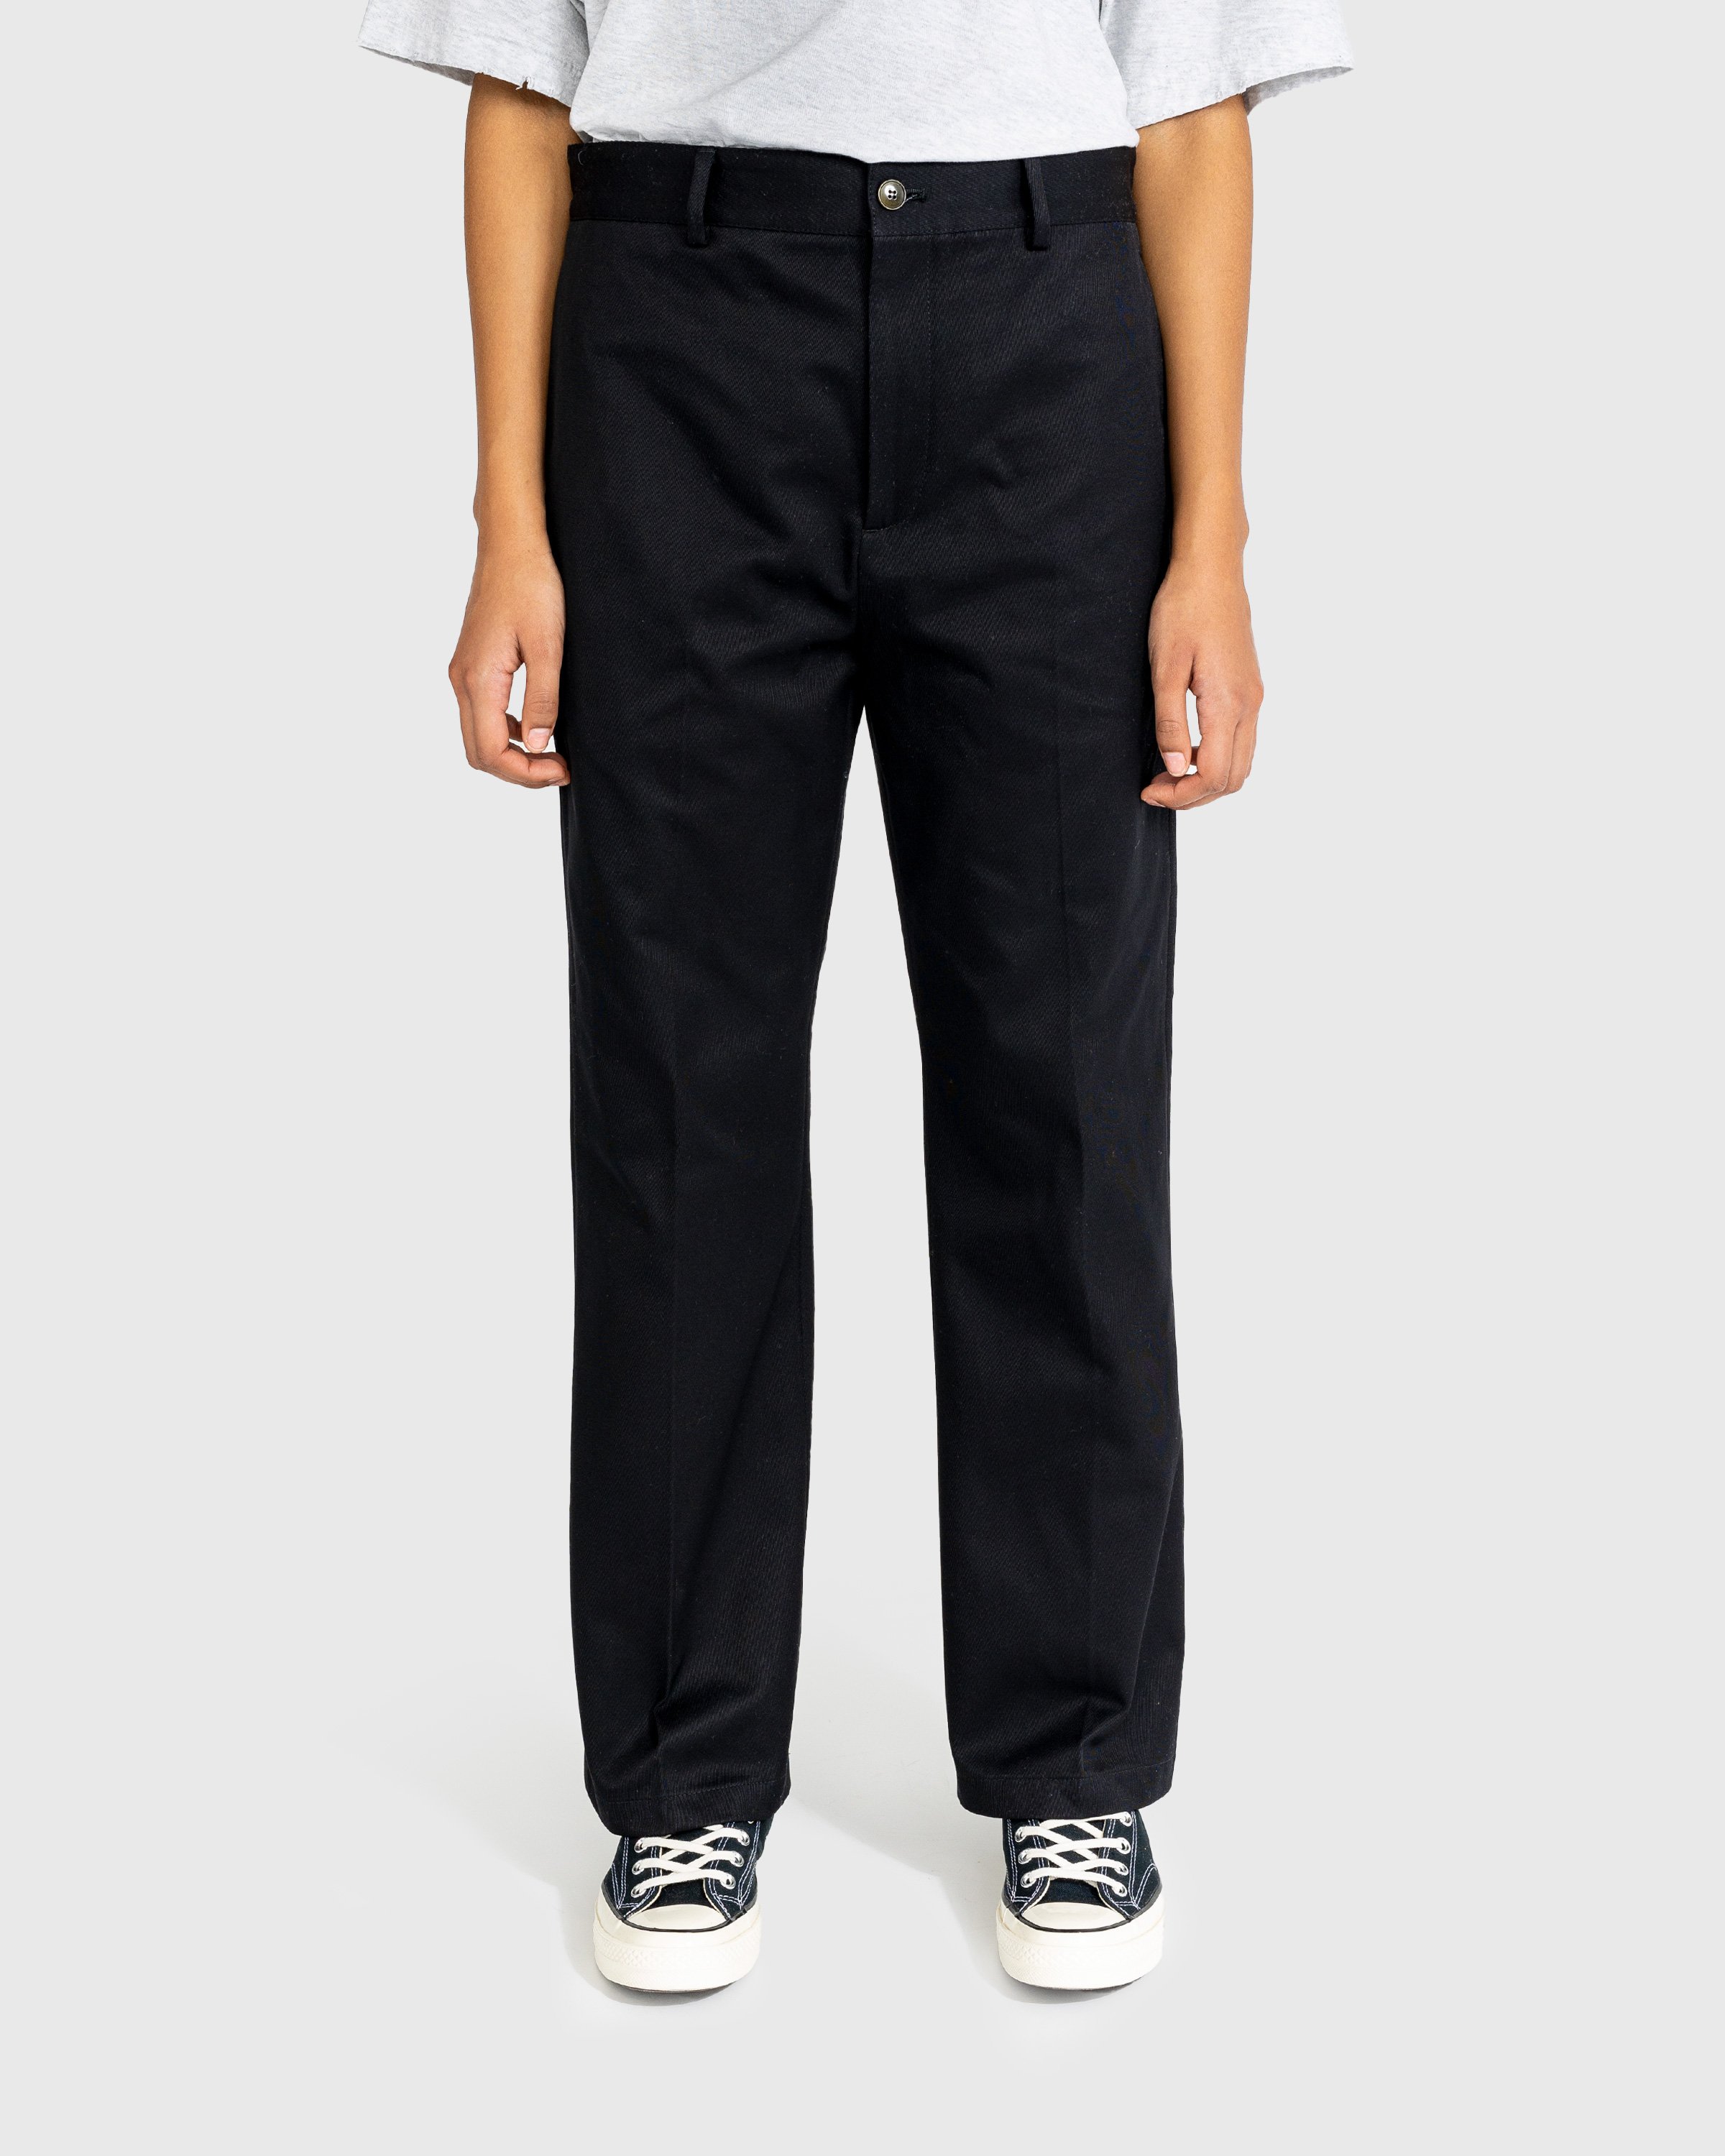 Acne Studios - Wool Blend Tailored Trousers Black - Clothing - Black - Image 2